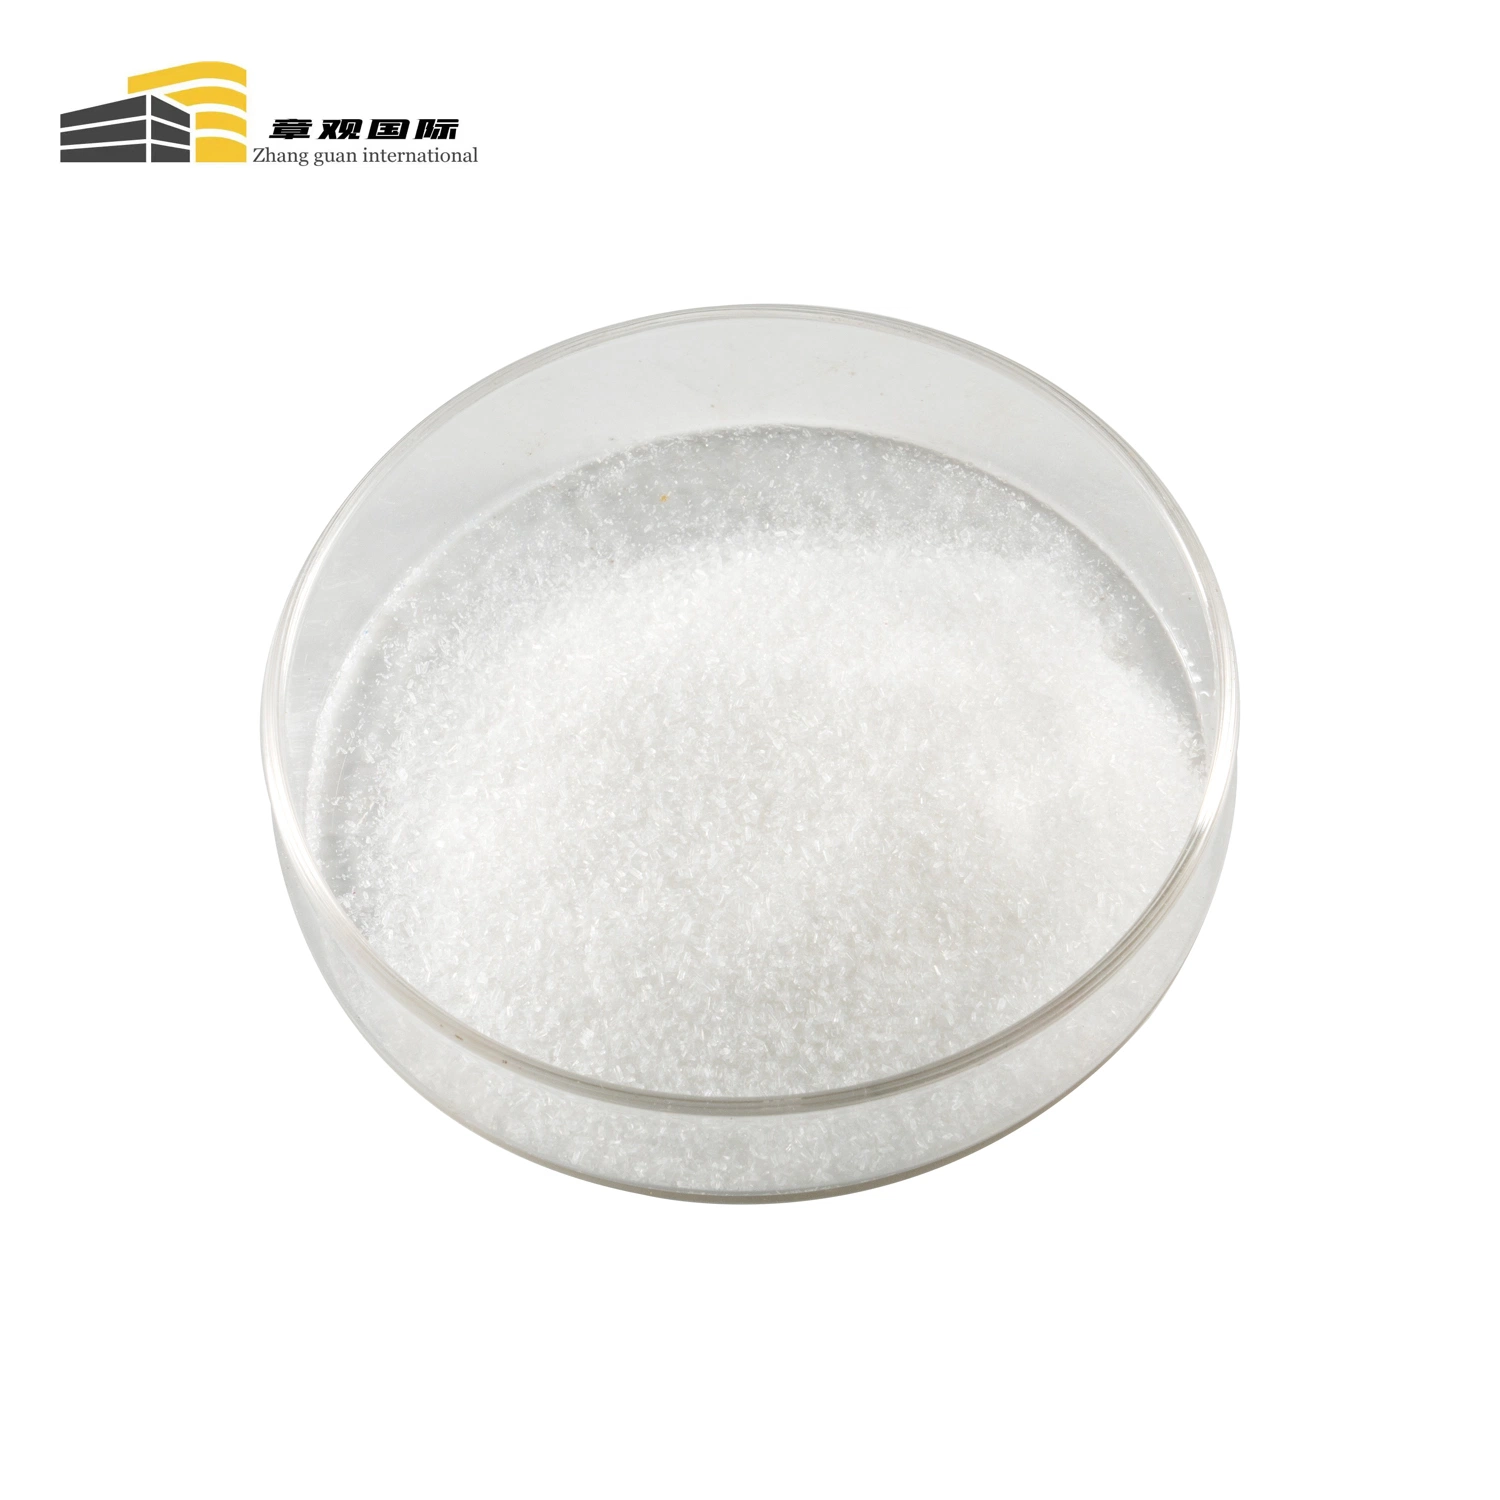 High Quality Food Grade Calcium Gluconate Pharmaceutical Grade CAS 299-28-5 Body Supplement at The Best Price